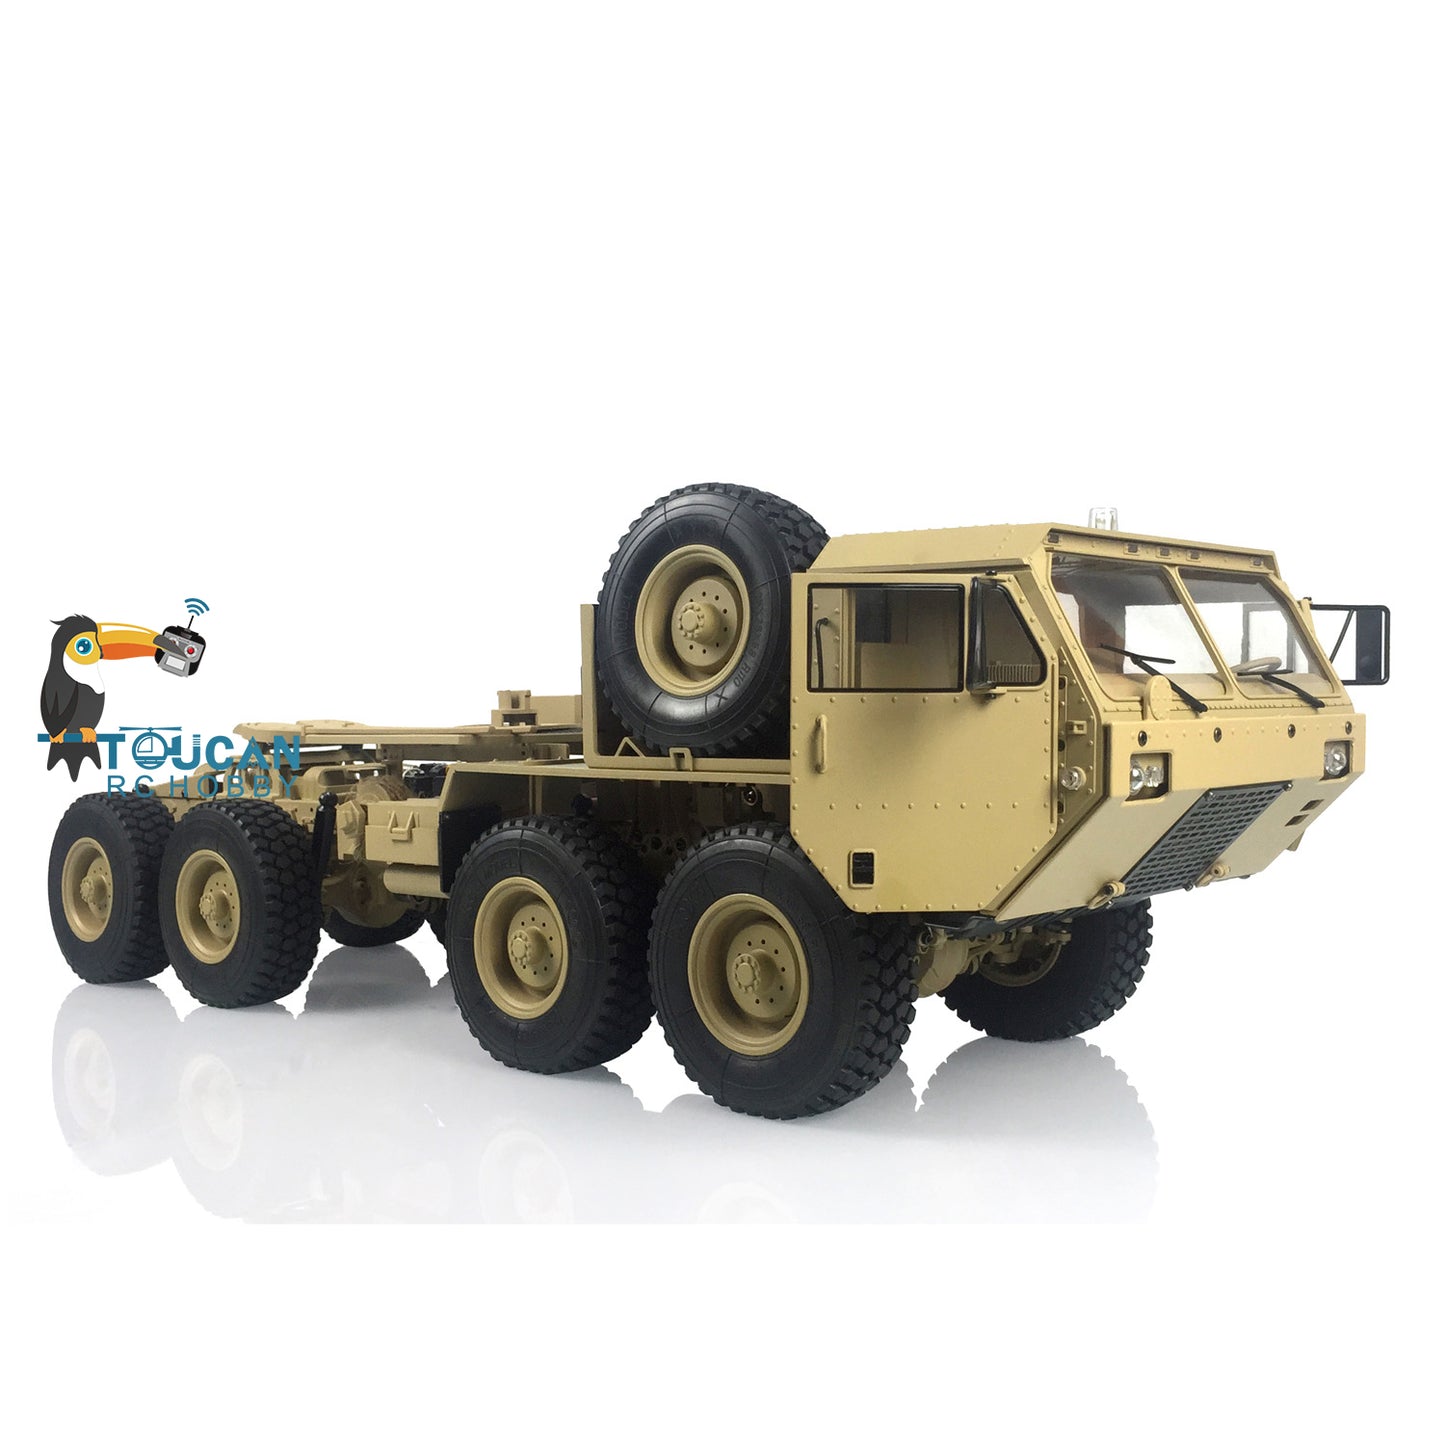 US STOCK 8x8 RC Military Truck 1/12 HG P802 Radio Control Car Metal Chassis Sounds Lights